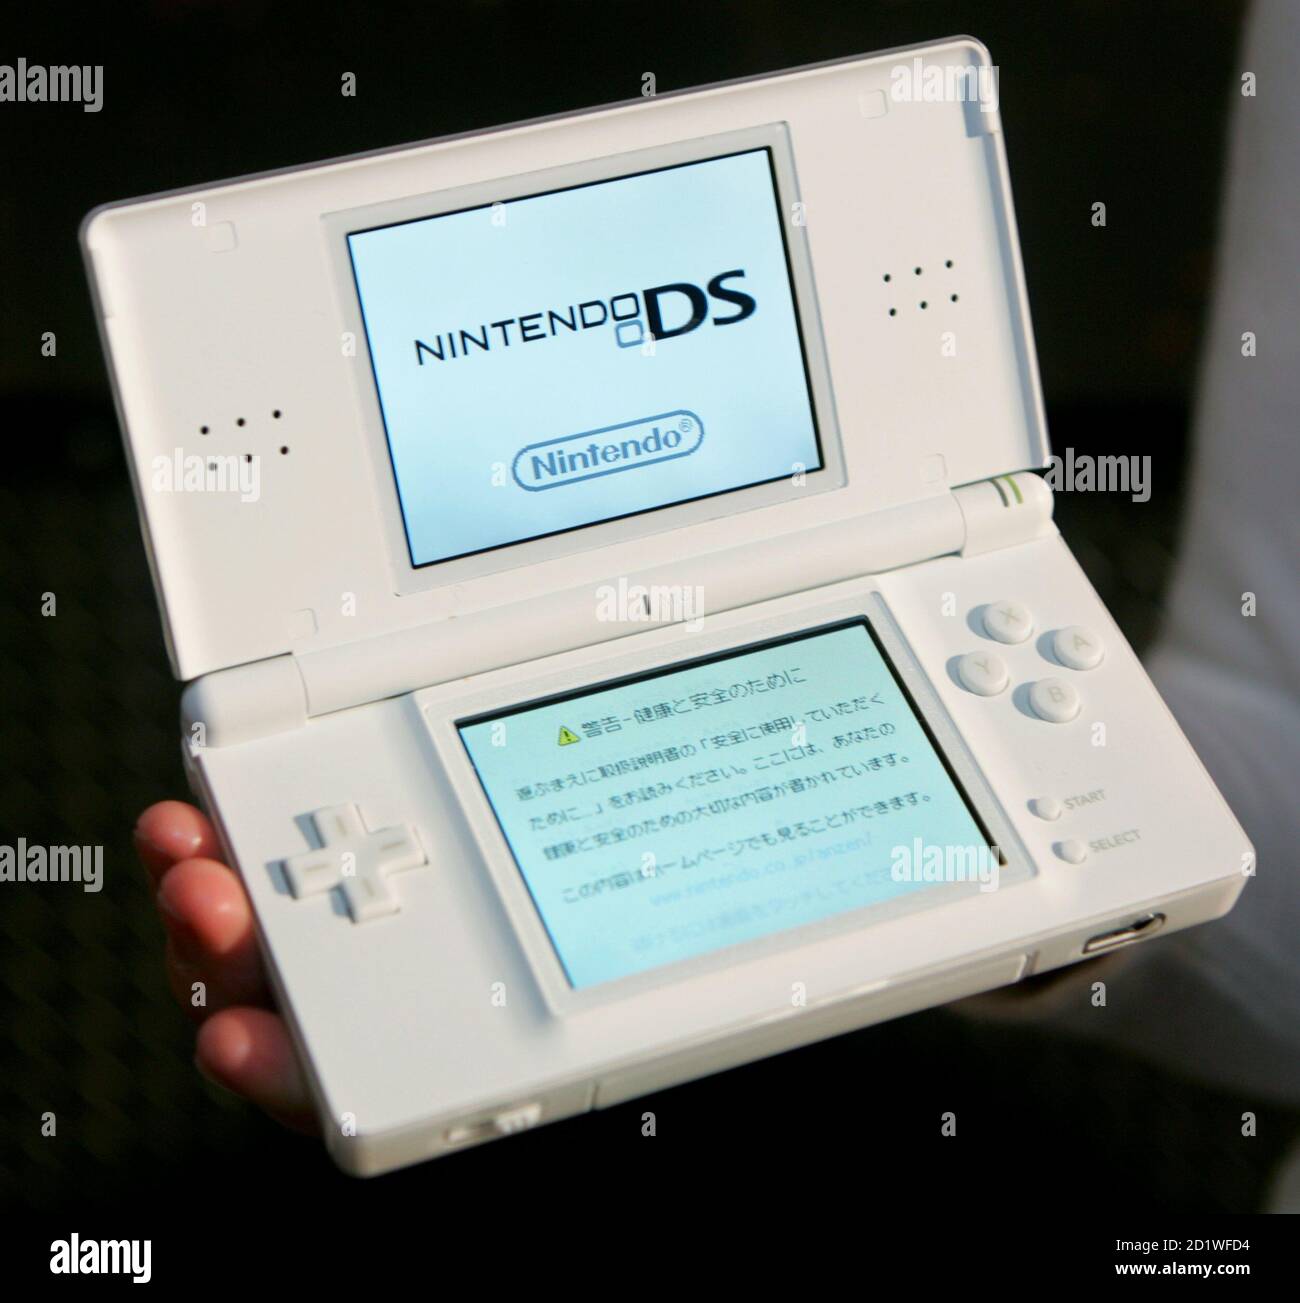 will there be a new ds